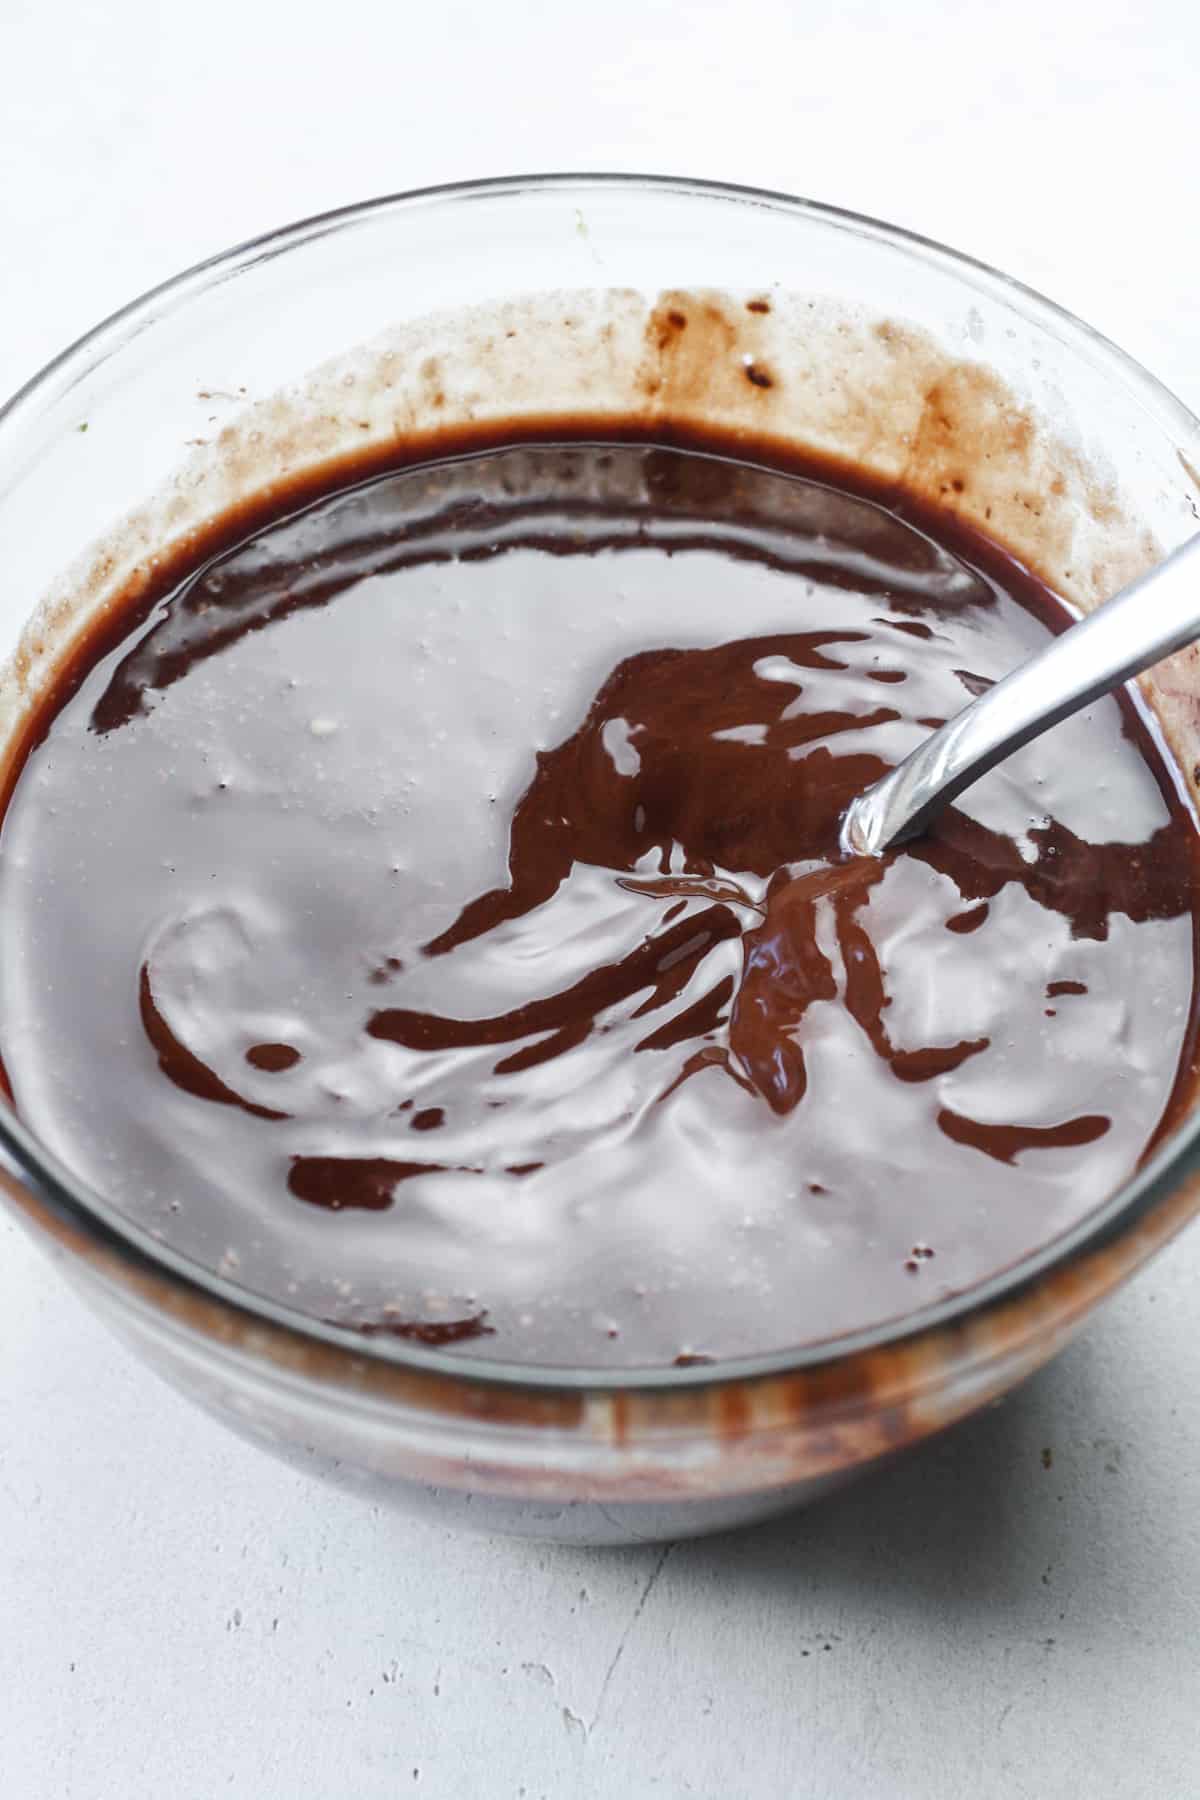 Creamy chocolate in bowl.